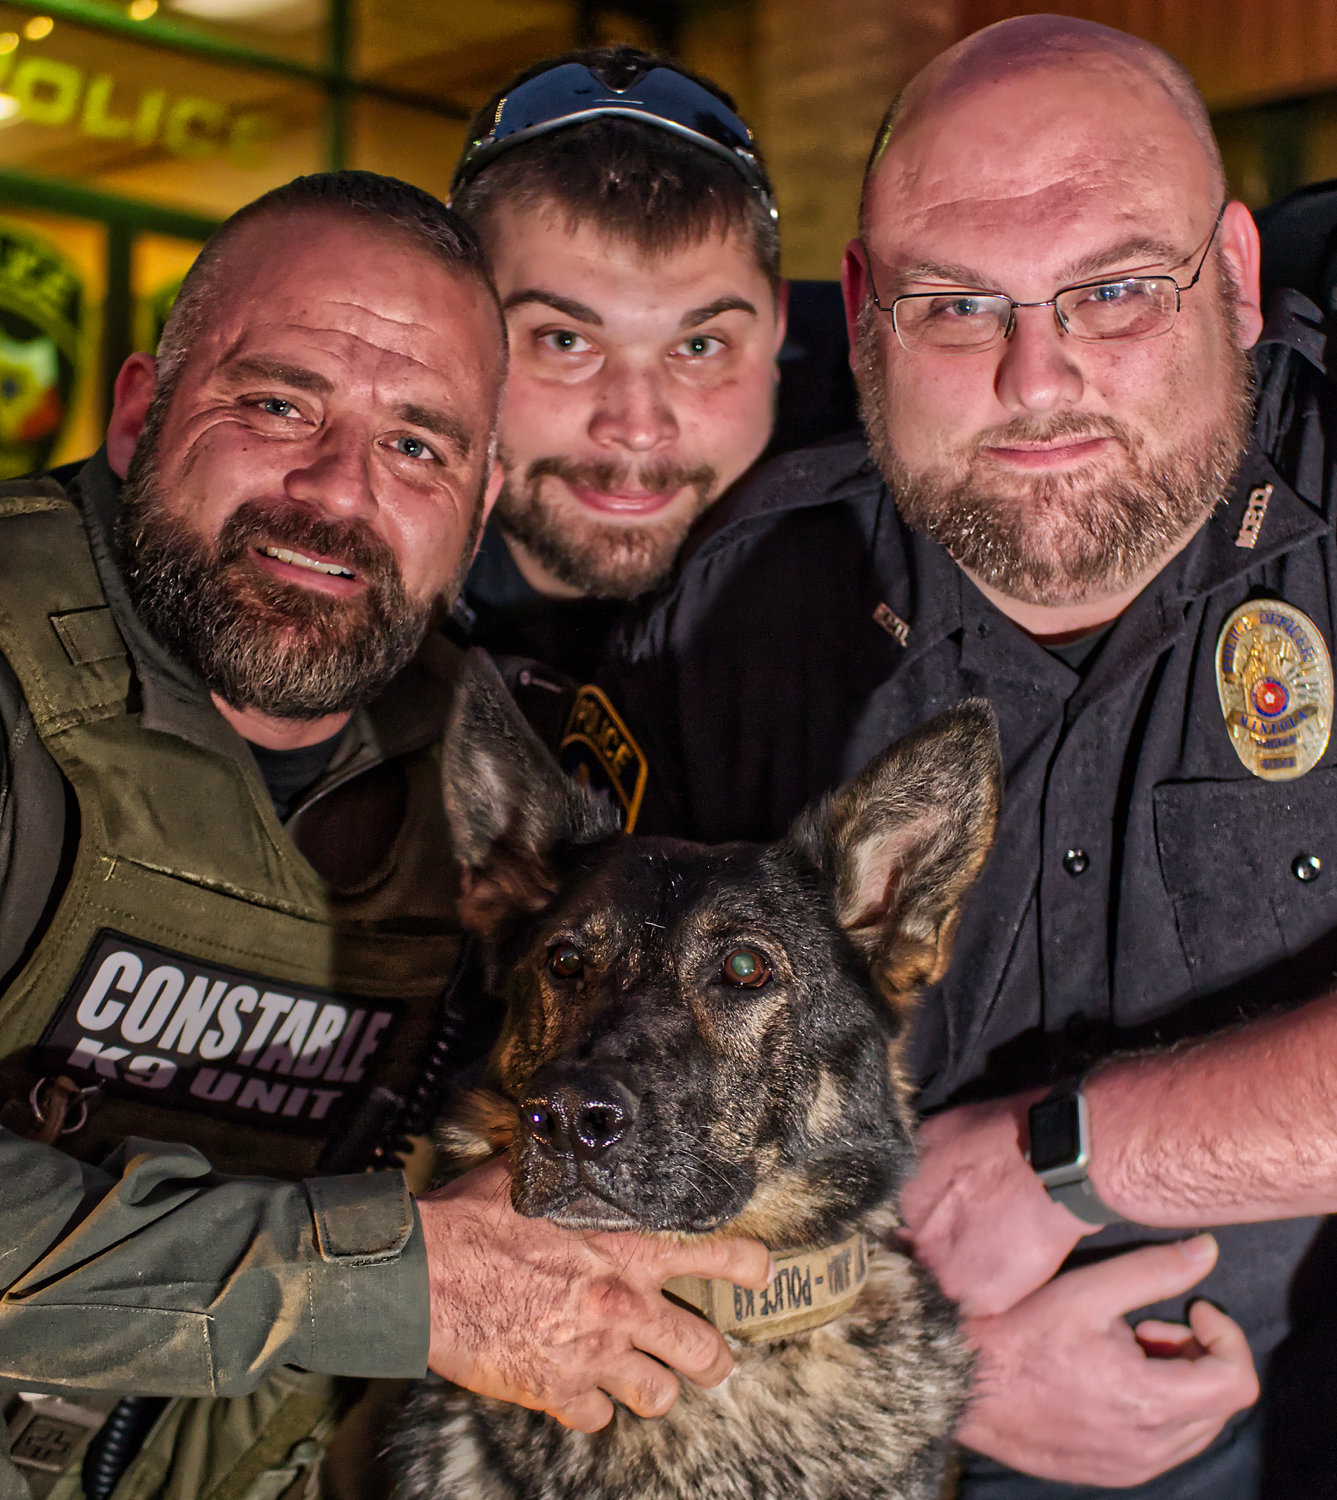 What started as stubble turned to shaggy and was trimmed to sharp, but no mane could compete with K-9 Juma's black and copper coat, pictured here (left to right) with Constable Kelly Smith, Officer Tucker George and Investigator Tommy Carden.